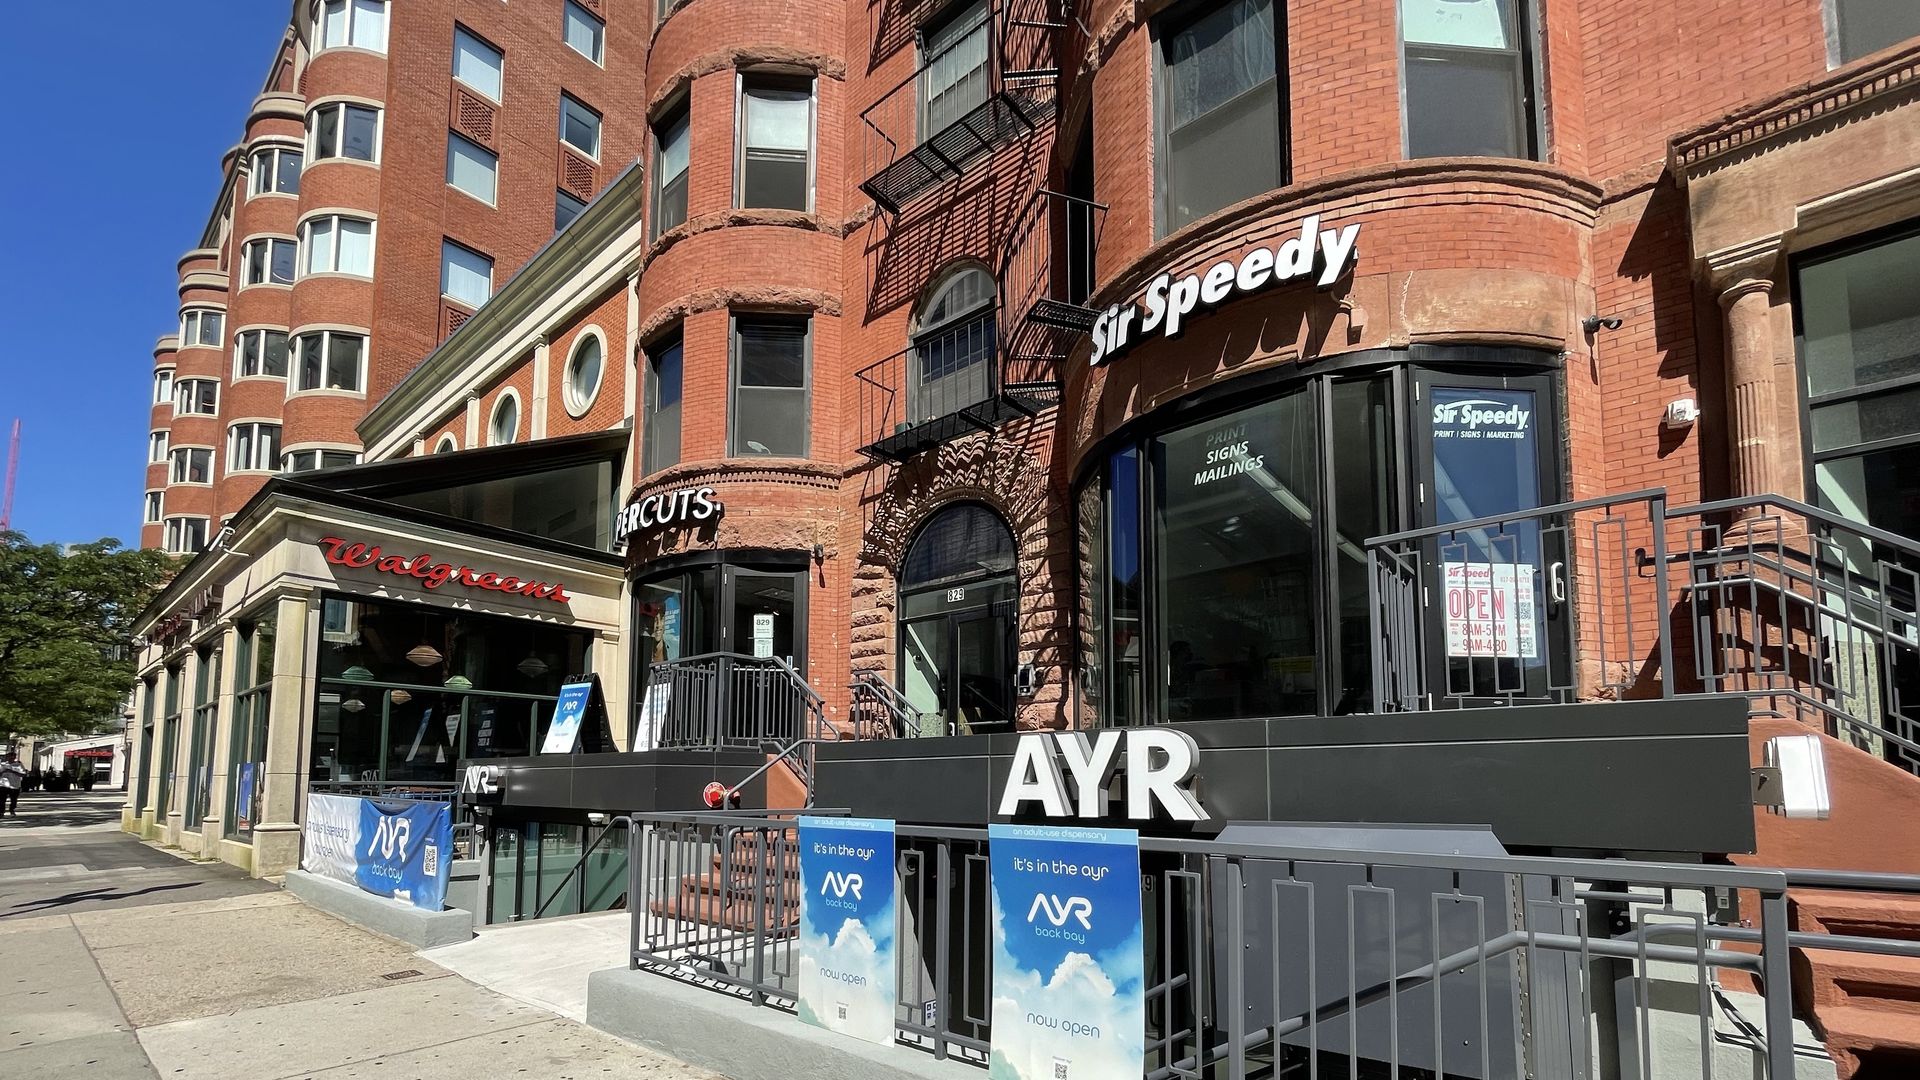 The view of Ayr Wellness dispensary from outside on Boylston Street. The word "Ayr" appears in white text over a black-painted storefront